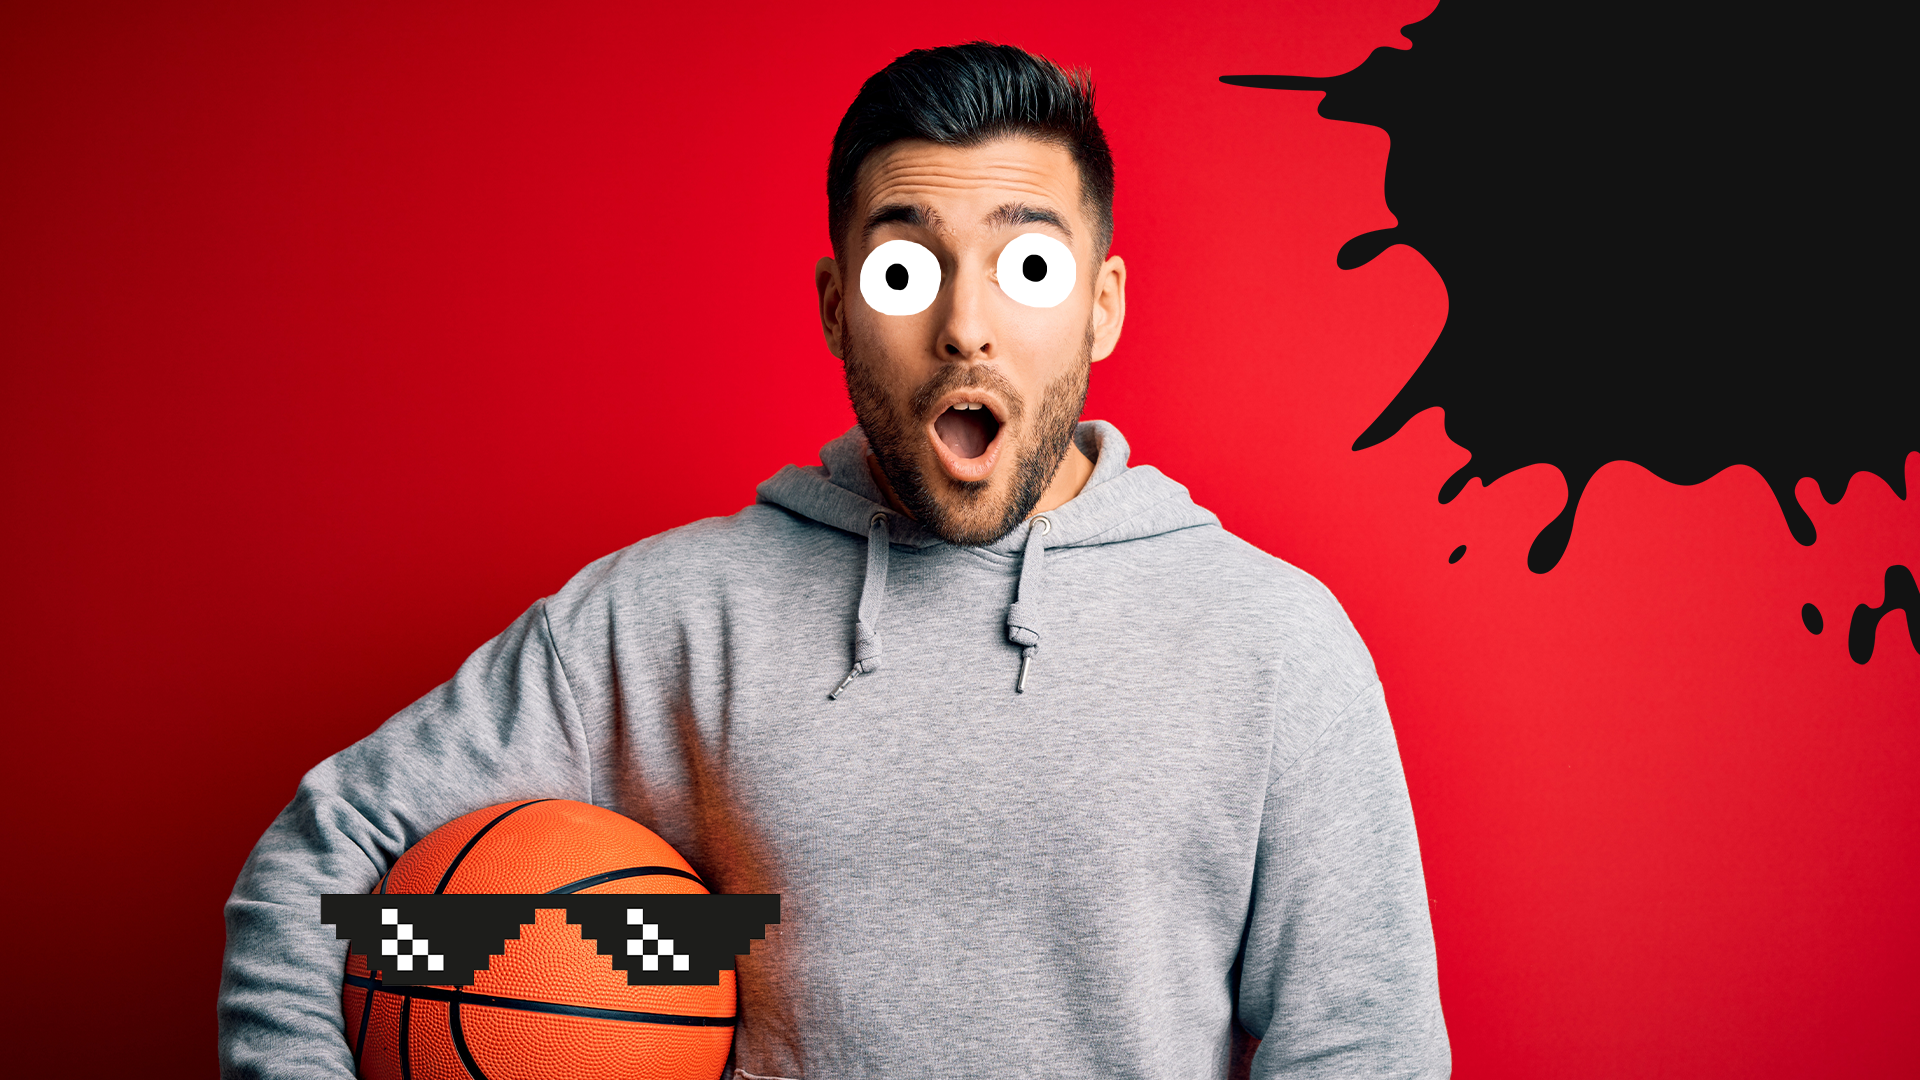 Surprised man with basketball in sunglasses on red background with splat 